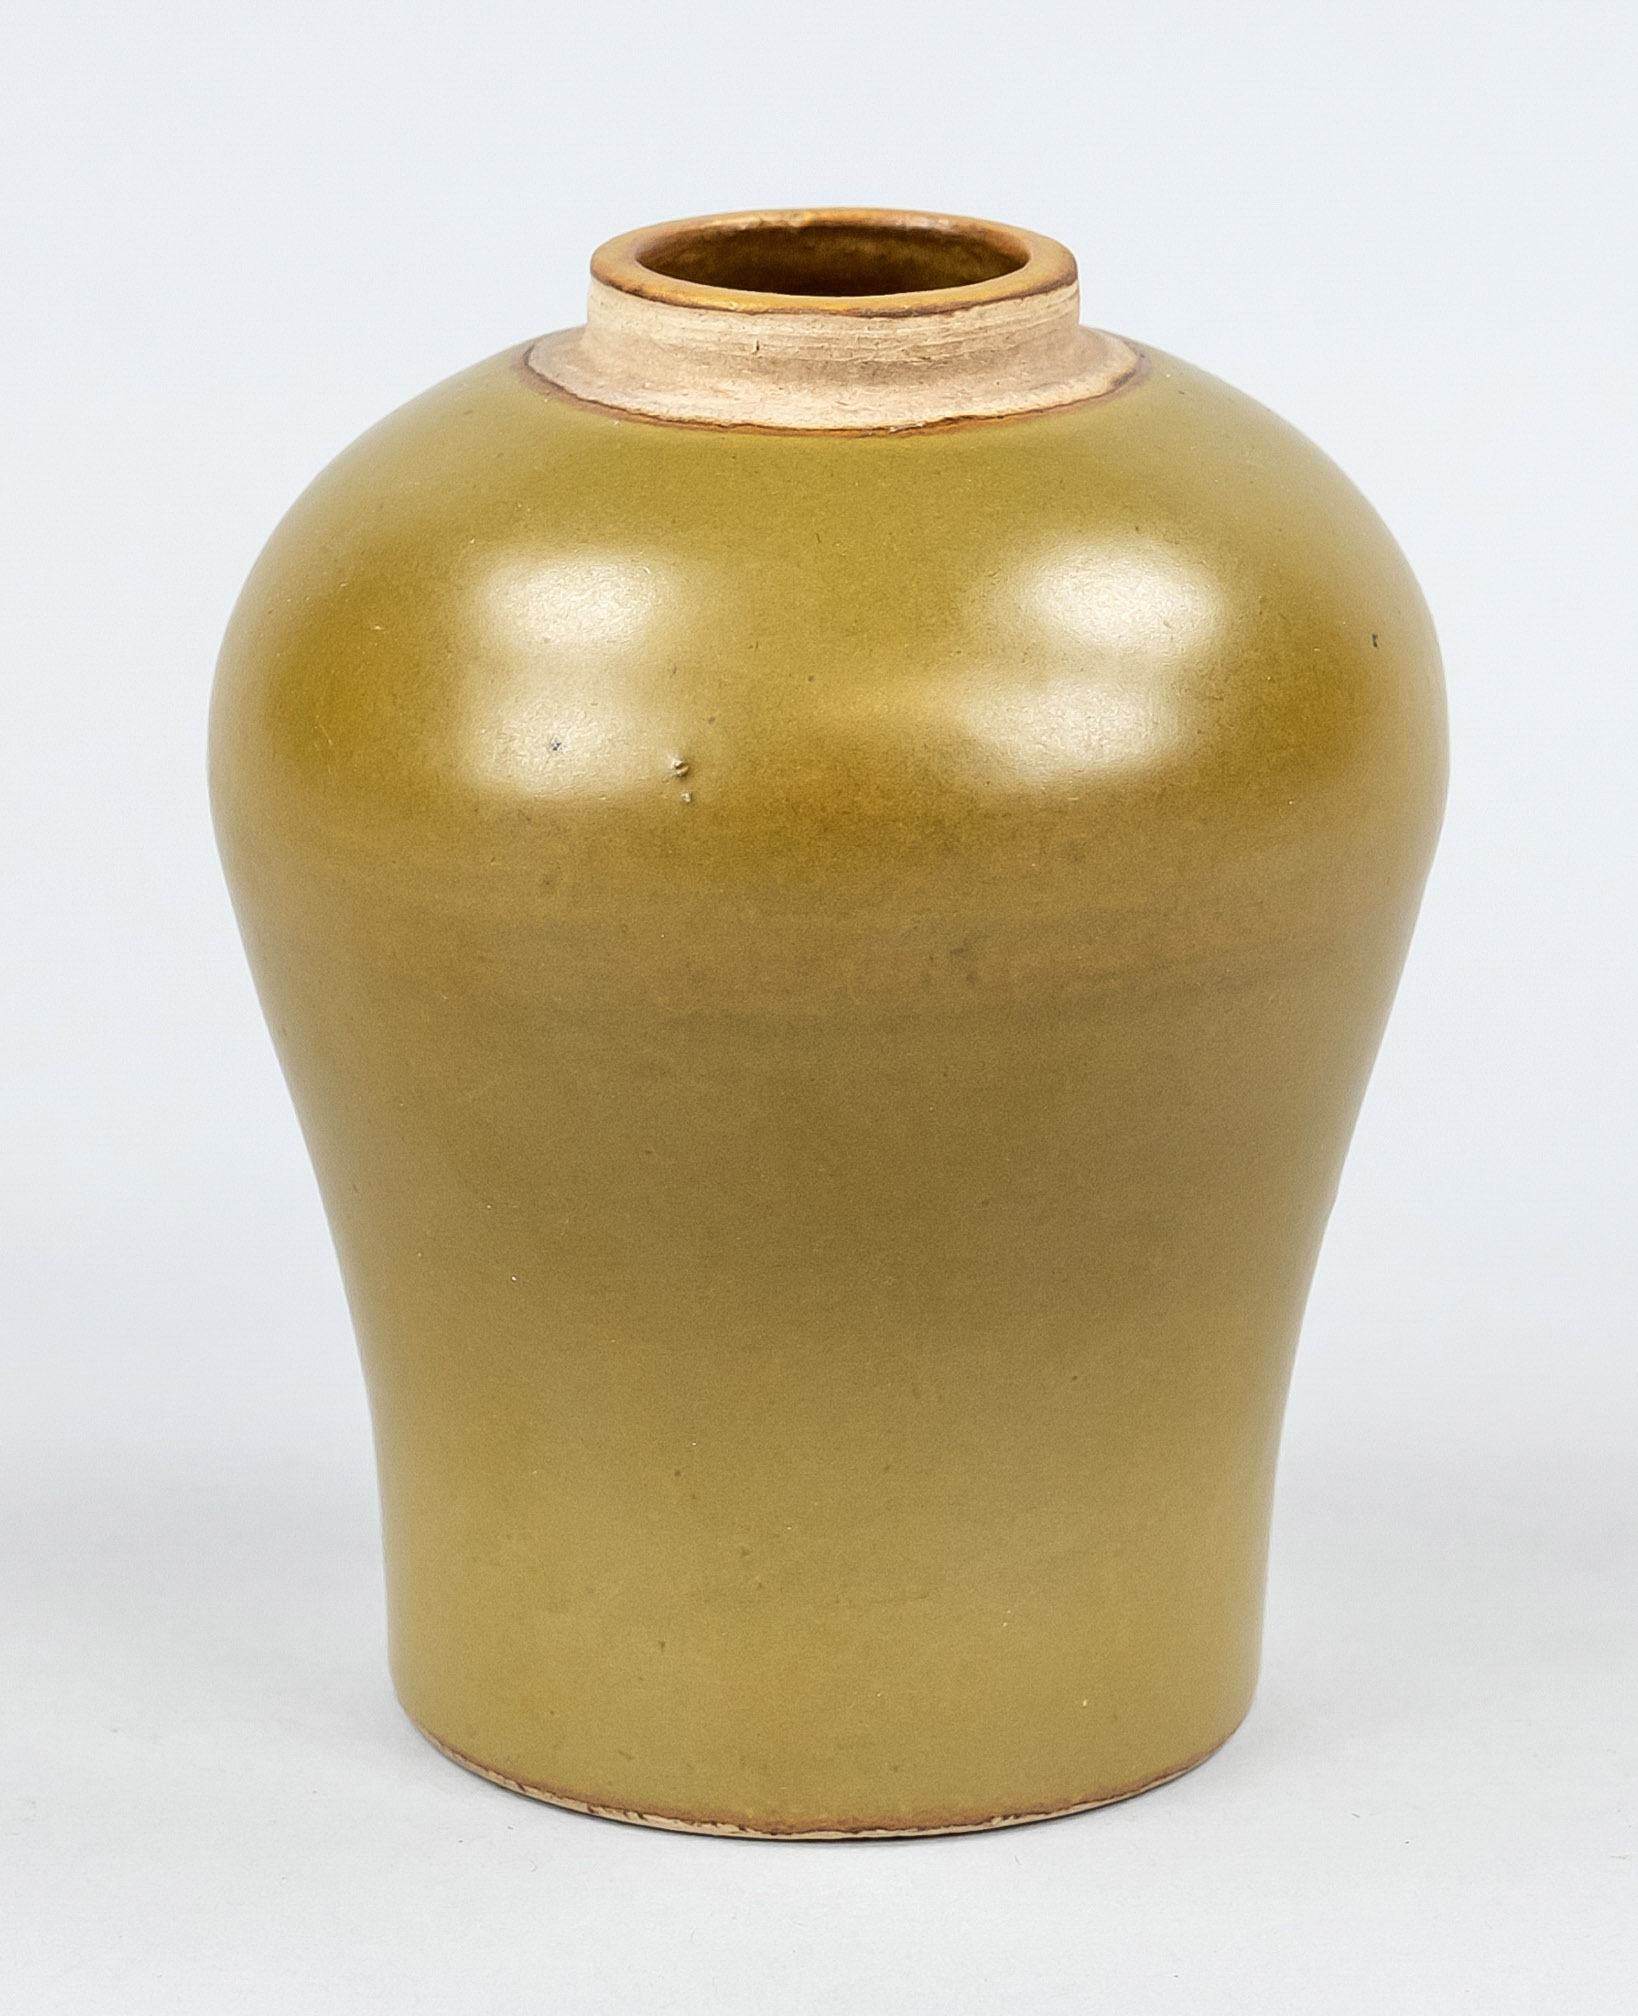 Meiping vase with tea dust glaze, China, 20th century, stoneware with yellow-green-brownish